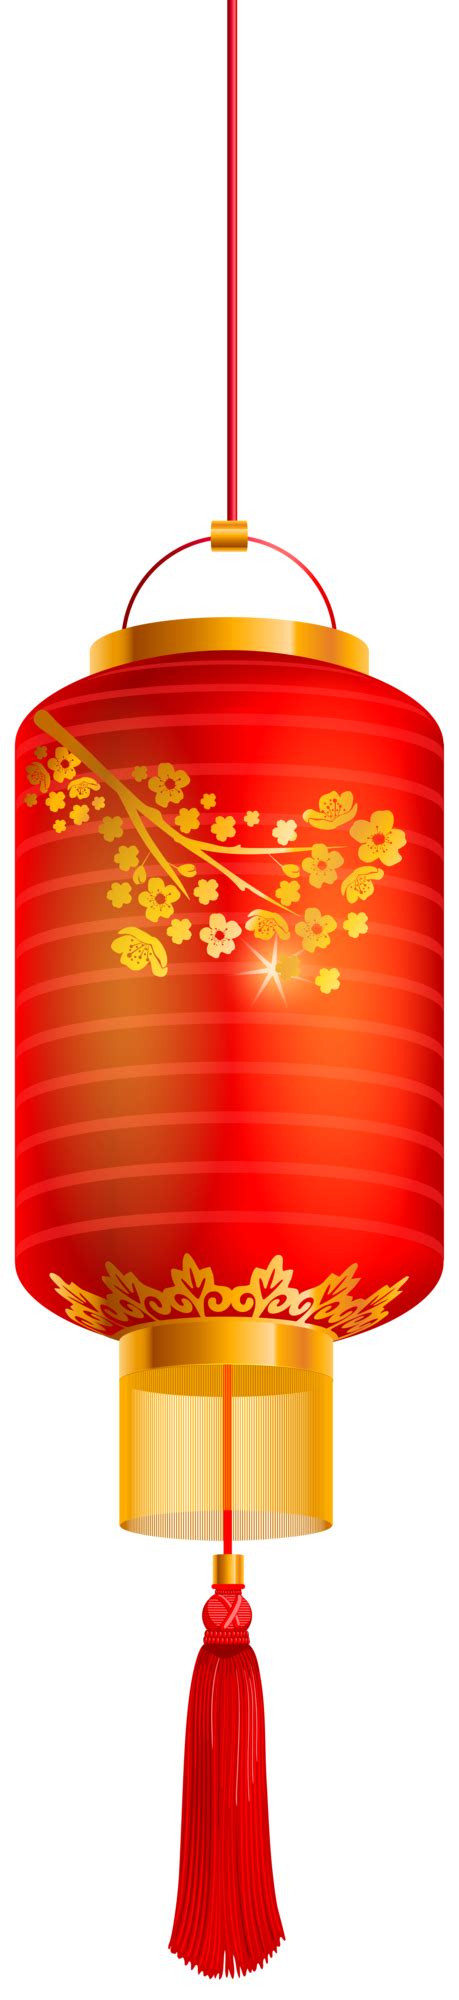 Decorative Lantern Png All Png All